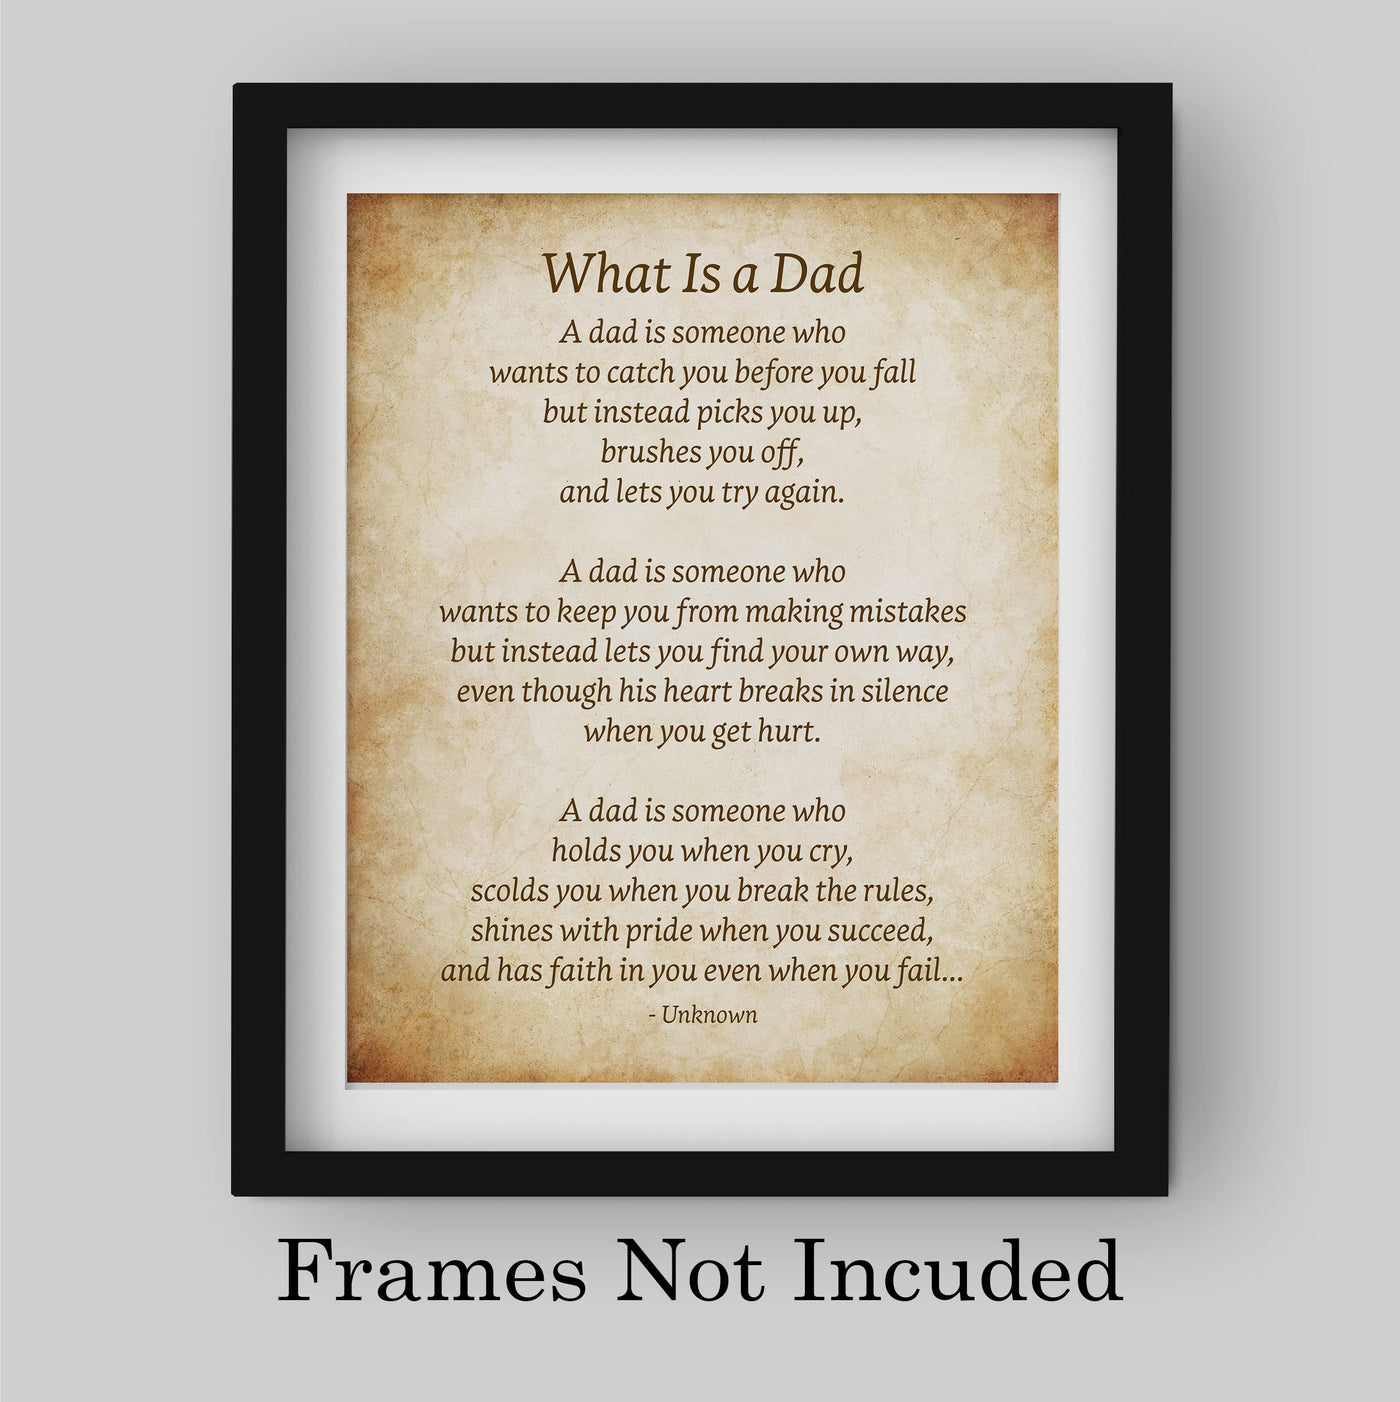 What Is A Dad-Inspirational Father's Day Quotes Wall Art -8 x 10" Loving Father Keepsake Poster Print -Ready to Frame. Perfect Home-Office-Desk Decor. Heartfelt Gift of Gratitude for All Dads!